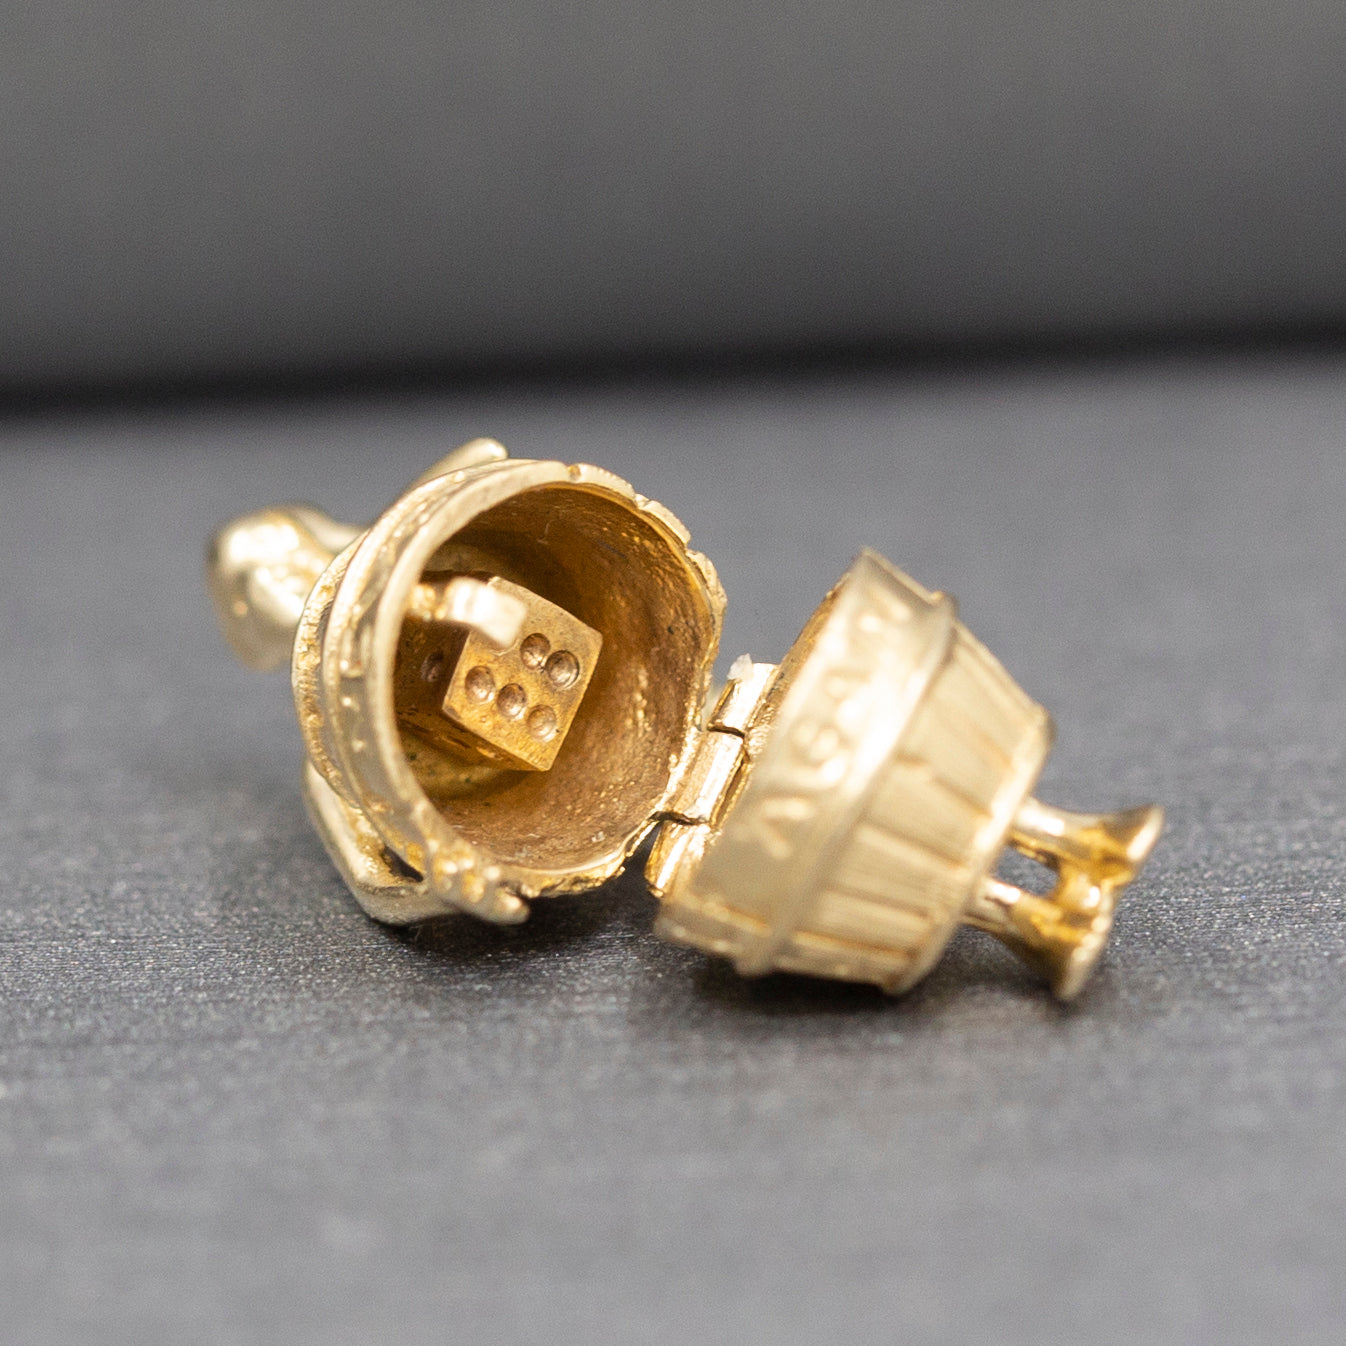 Vintage Man in a Barrel Good Luck Bad Luck Dice Charm in 14k Yellow Gold